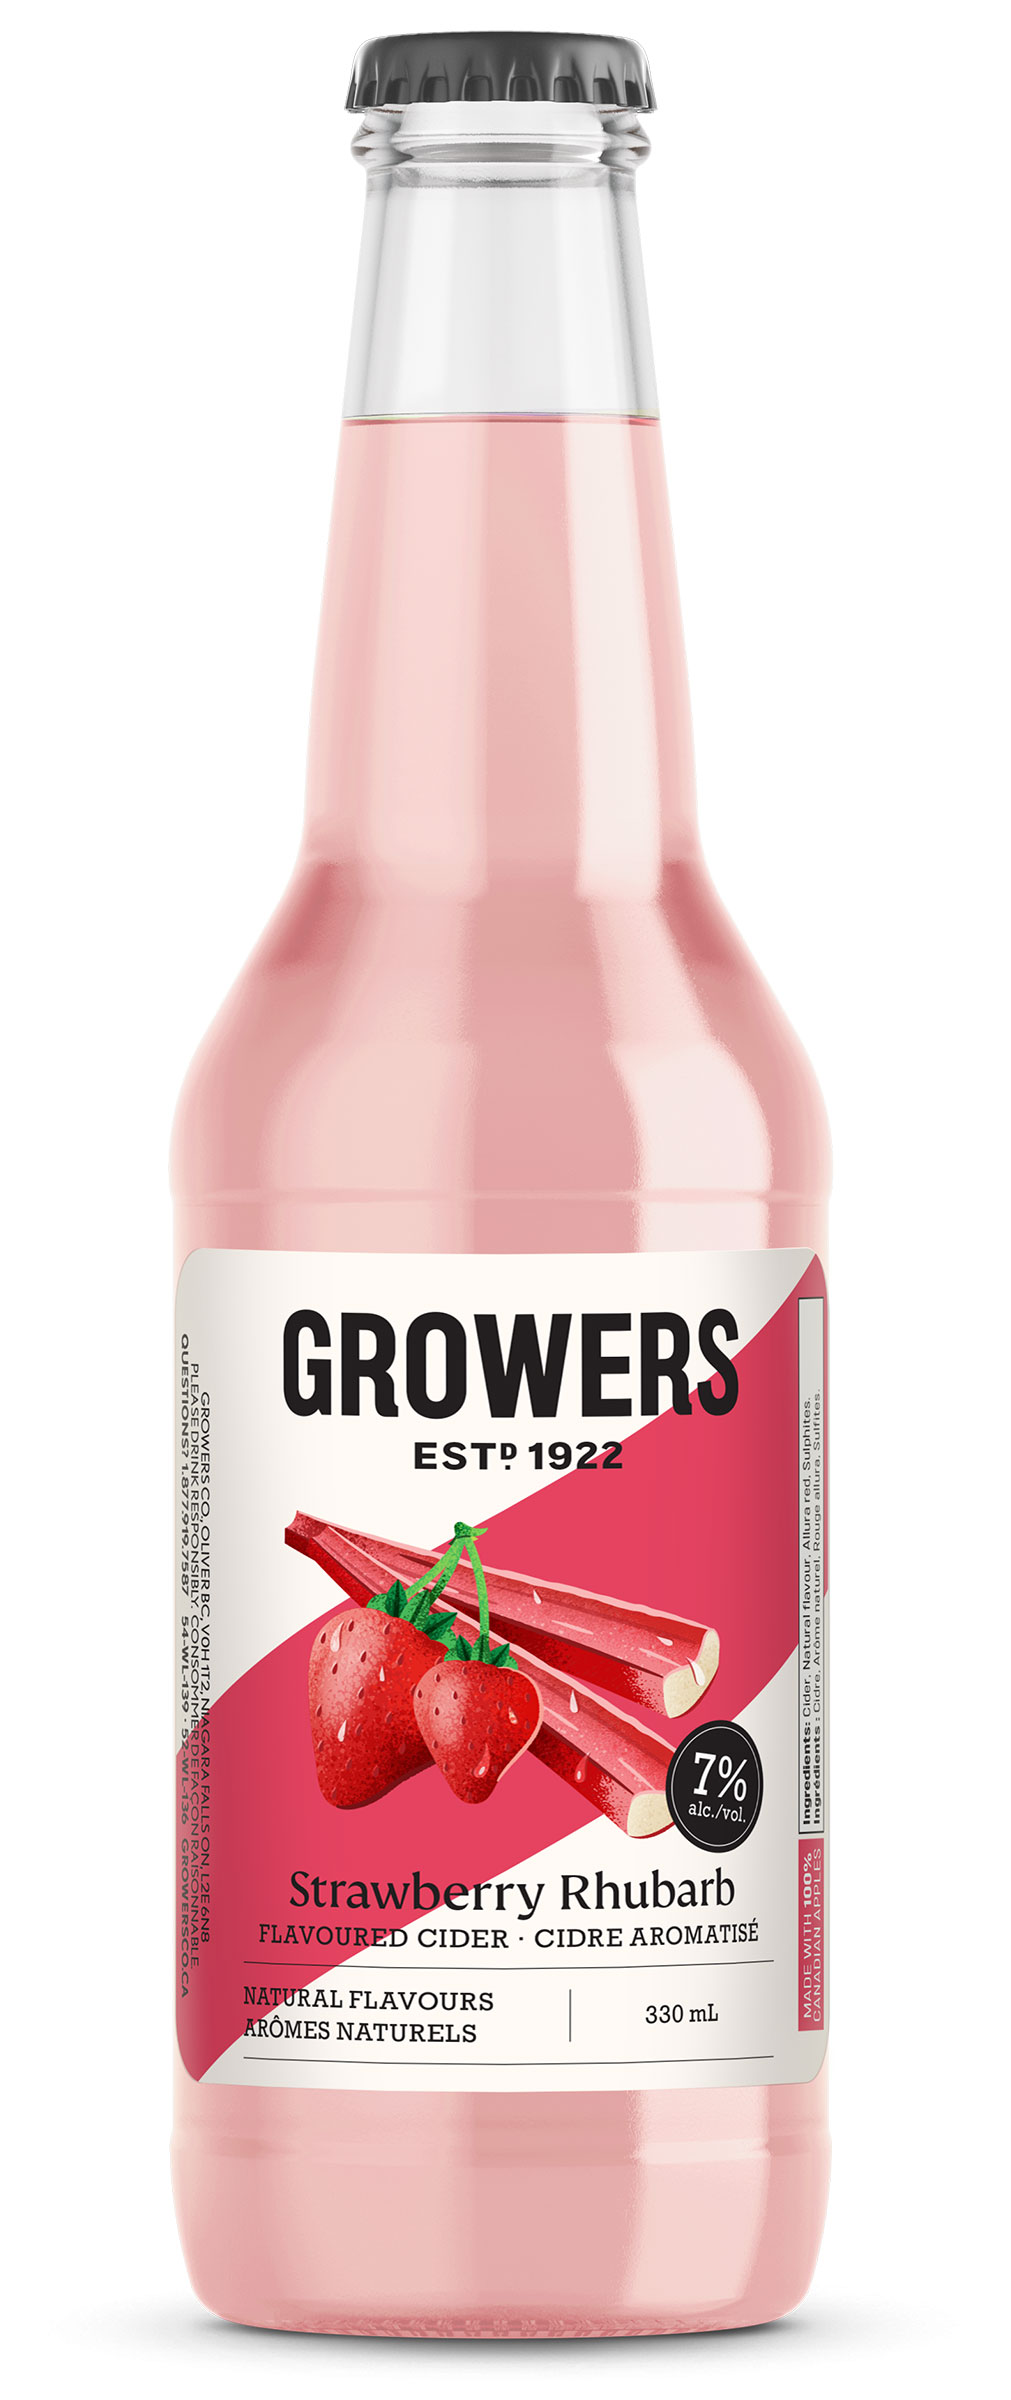 Bottle of Strawberry Rhubarb Growers Cider